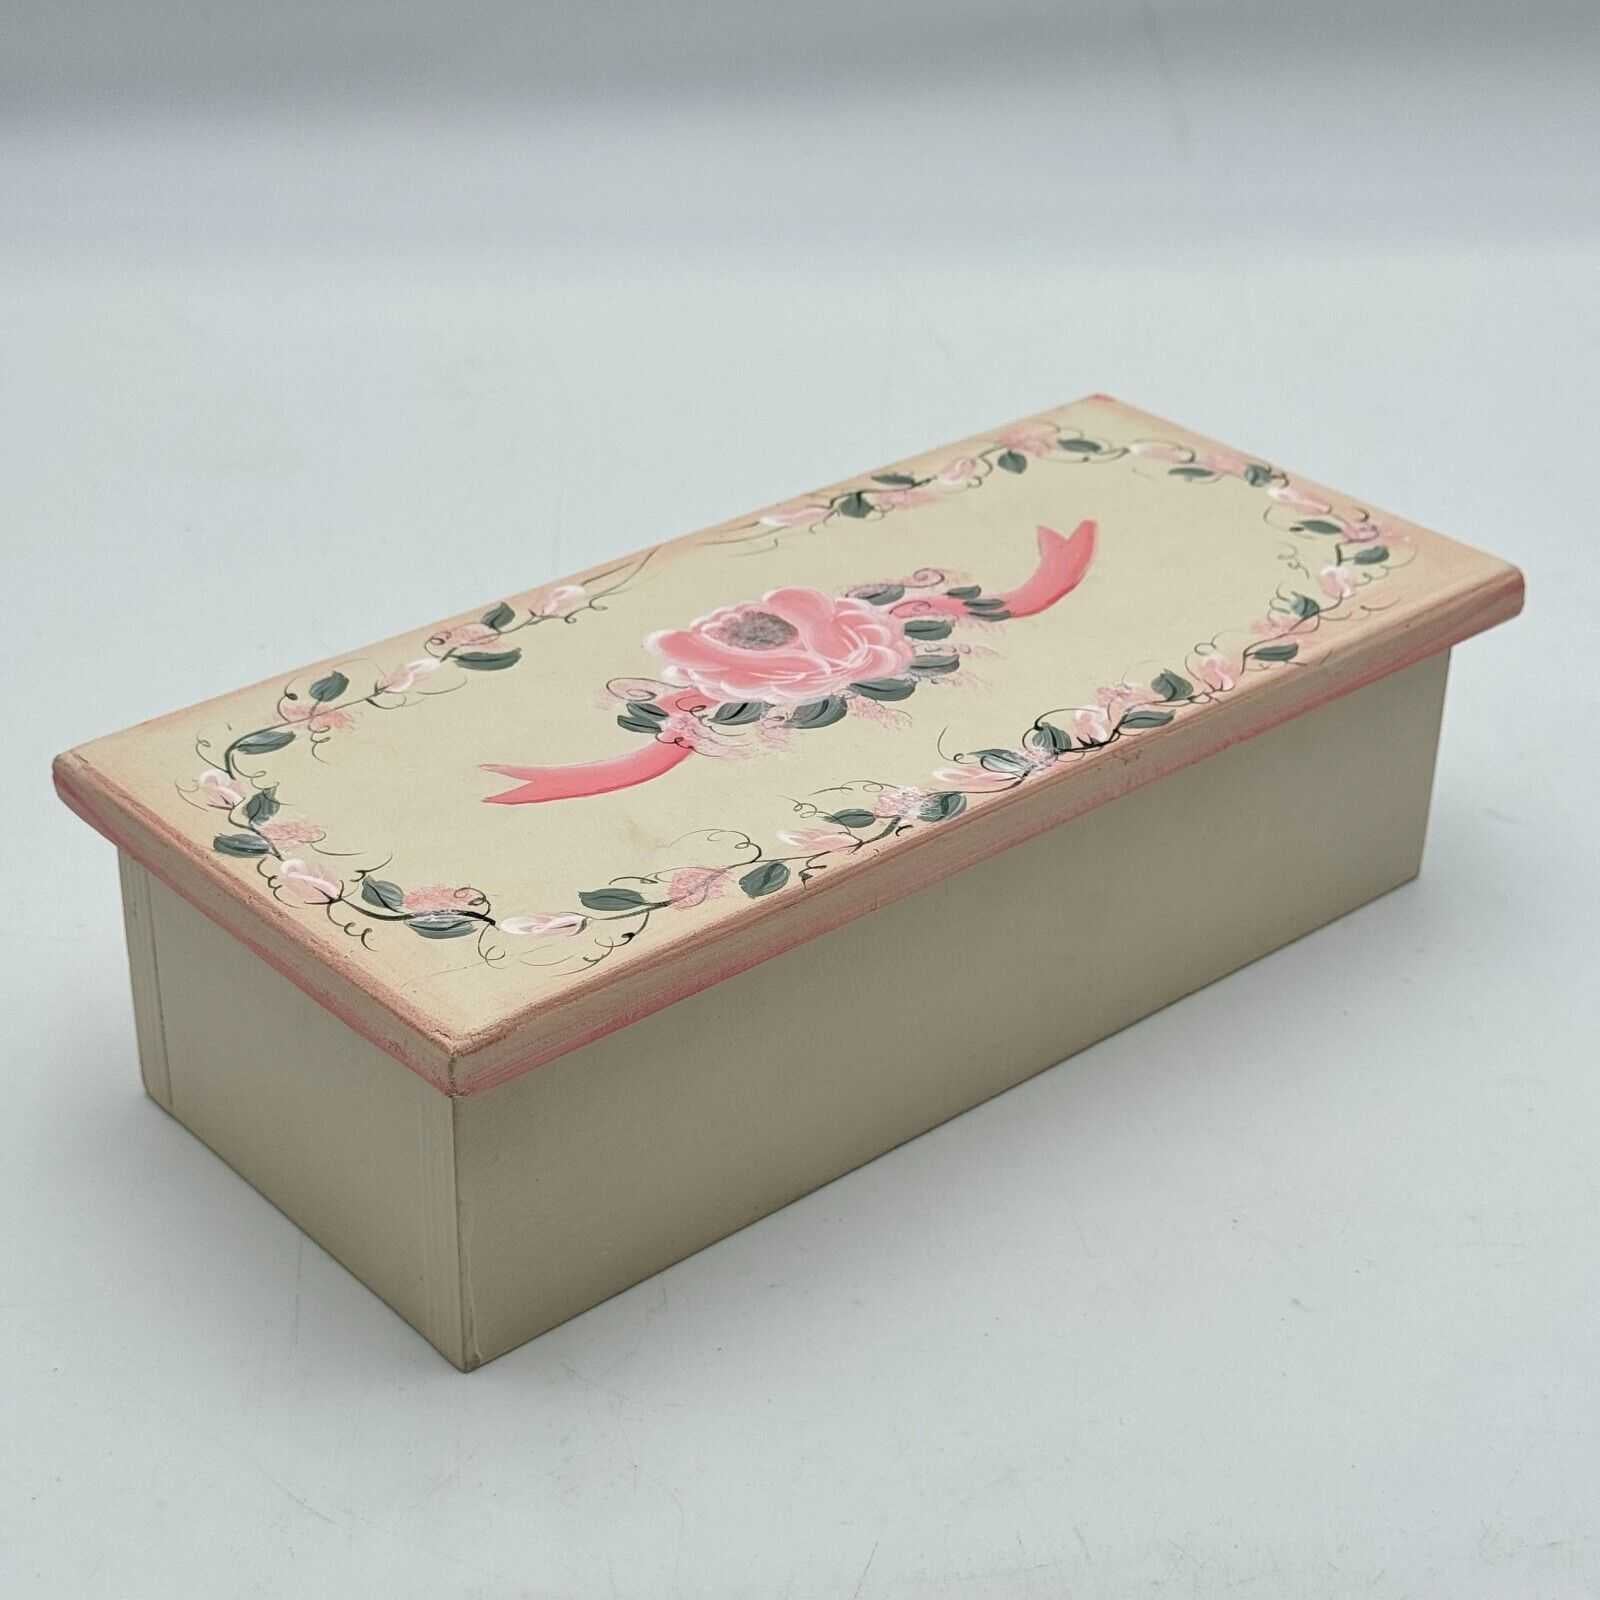 Floral Wood Box with Lid Jewelry Box Storage Case